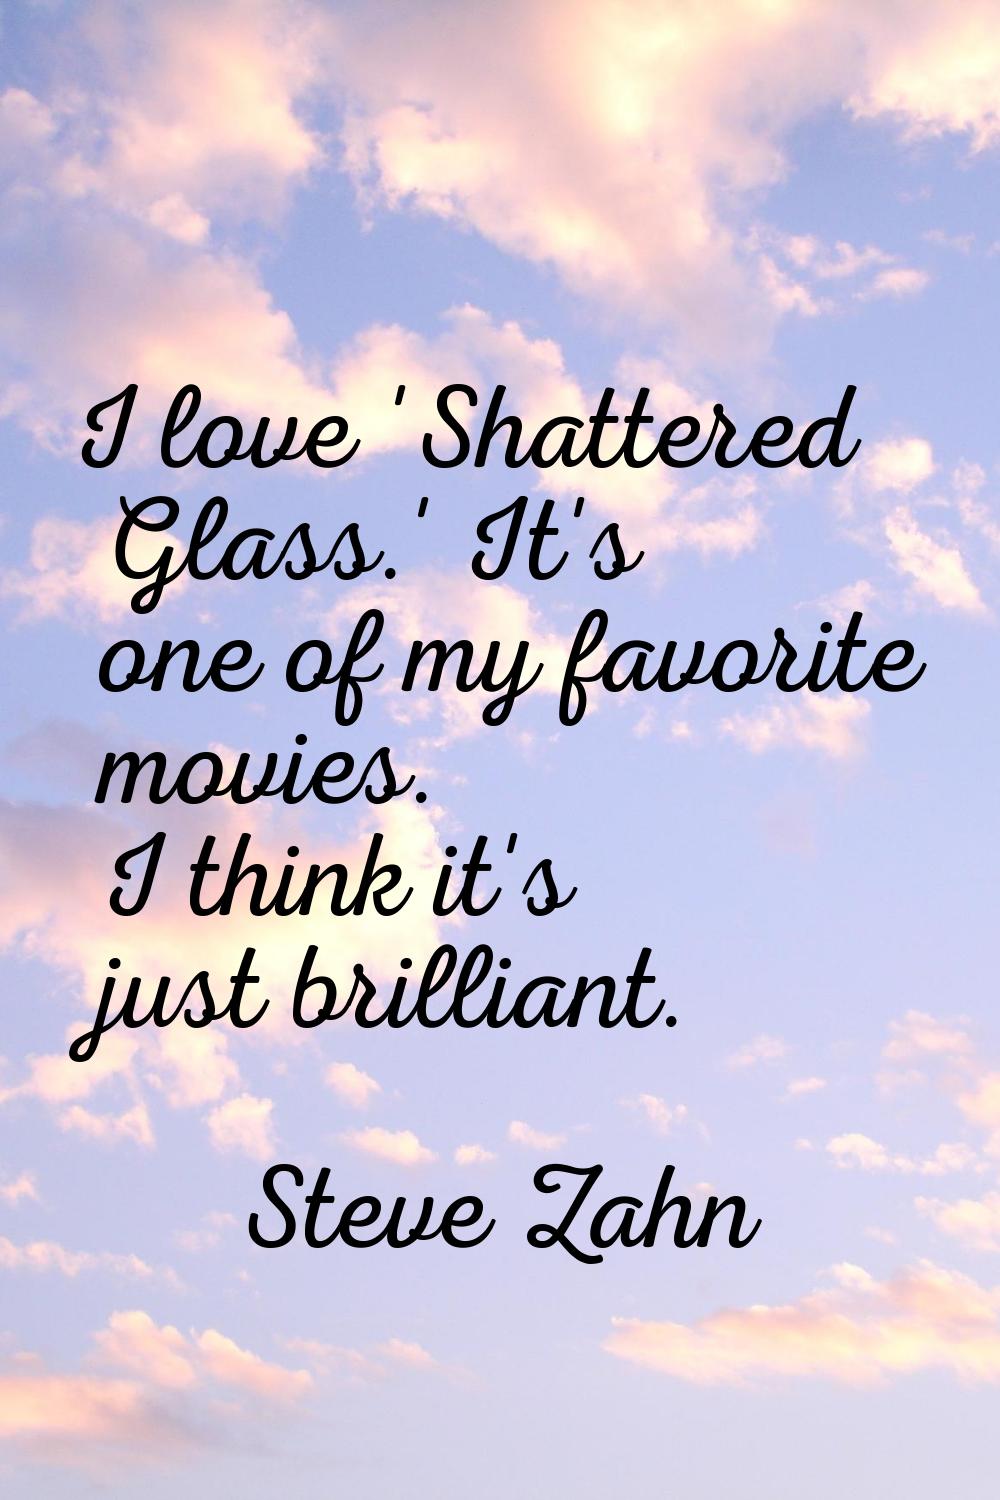 I love 'Shattered Glass.' It's one of my favorite movies. I think it's just brilliant.